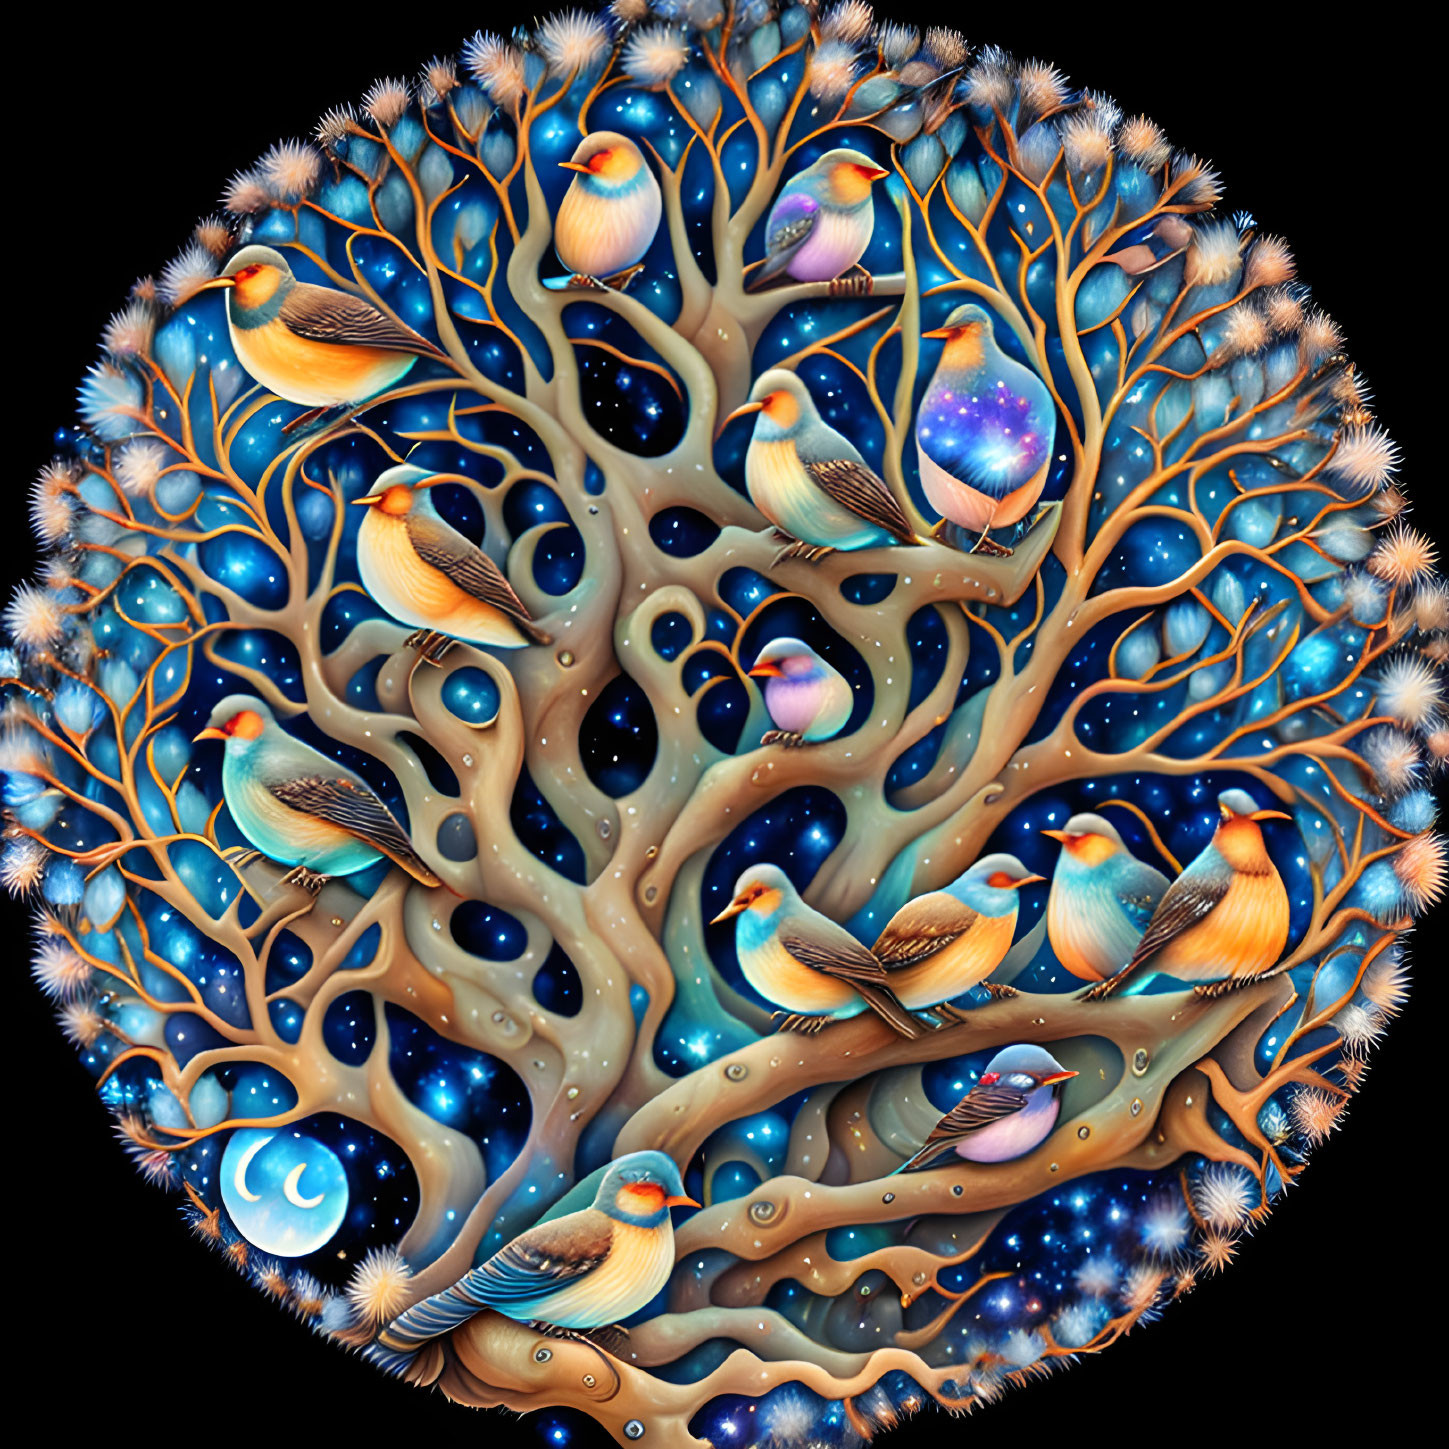 Circular Artwork: Tree Globe with Colorful Birds & Celestial Elements